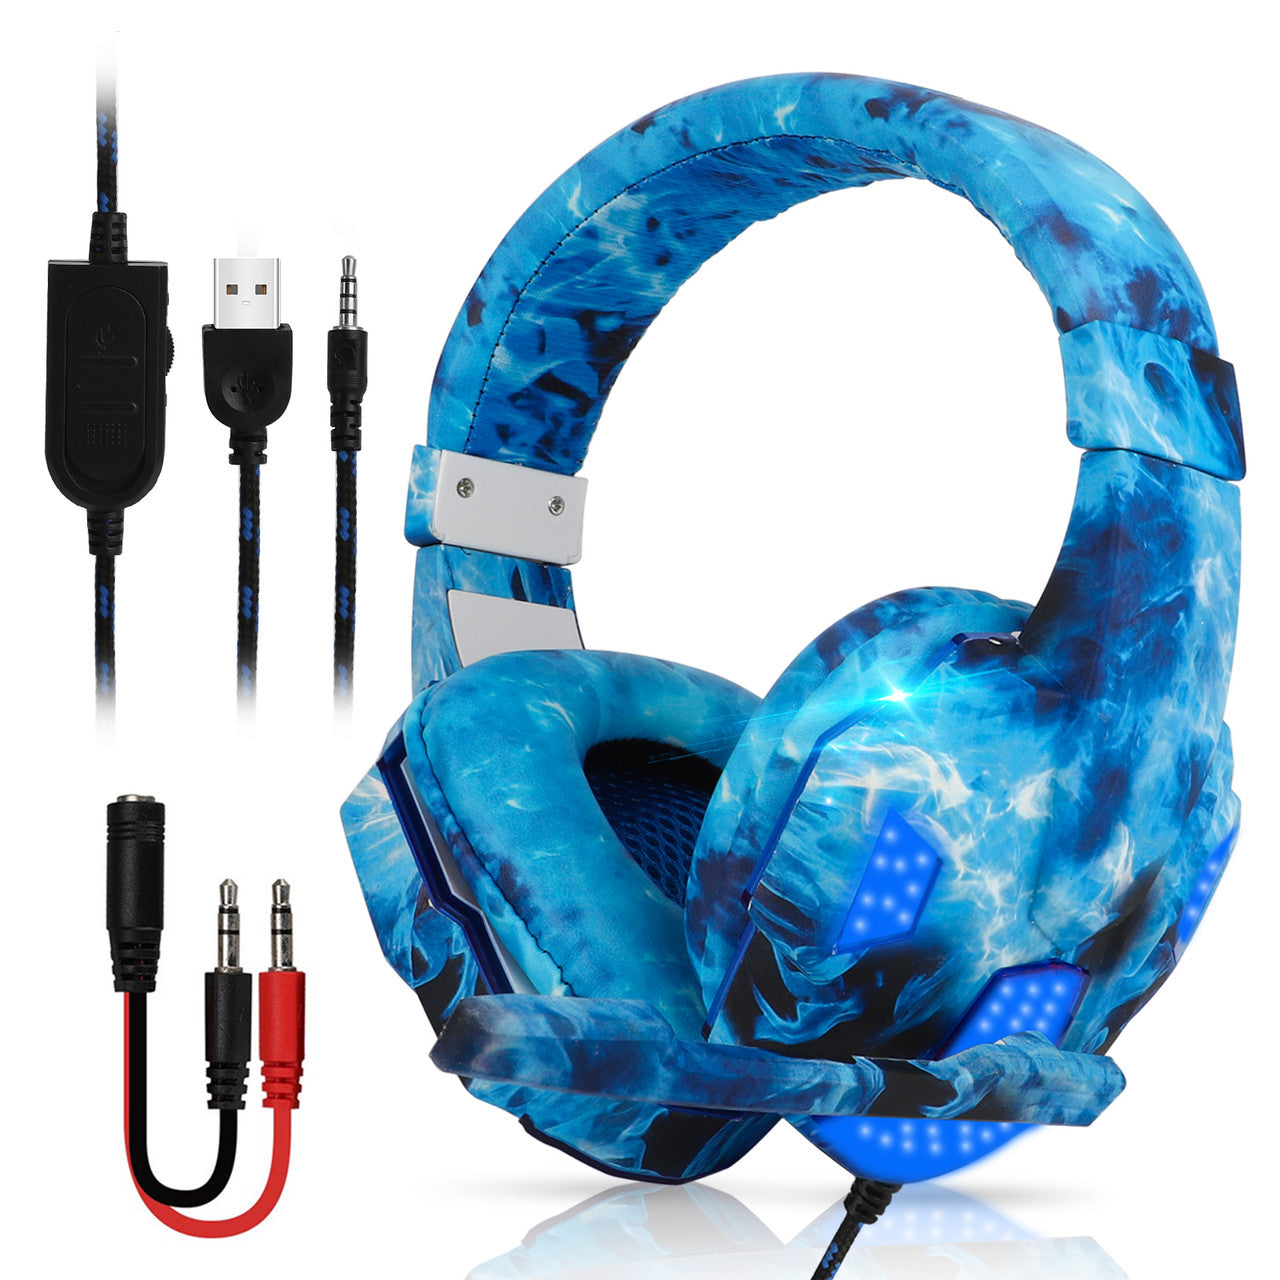 Wired Gaming Headset 3.5MM Headphone Jack - For Game, PC, Controller with Mic, Surround Sound, Soft Earmuffs (Blue)